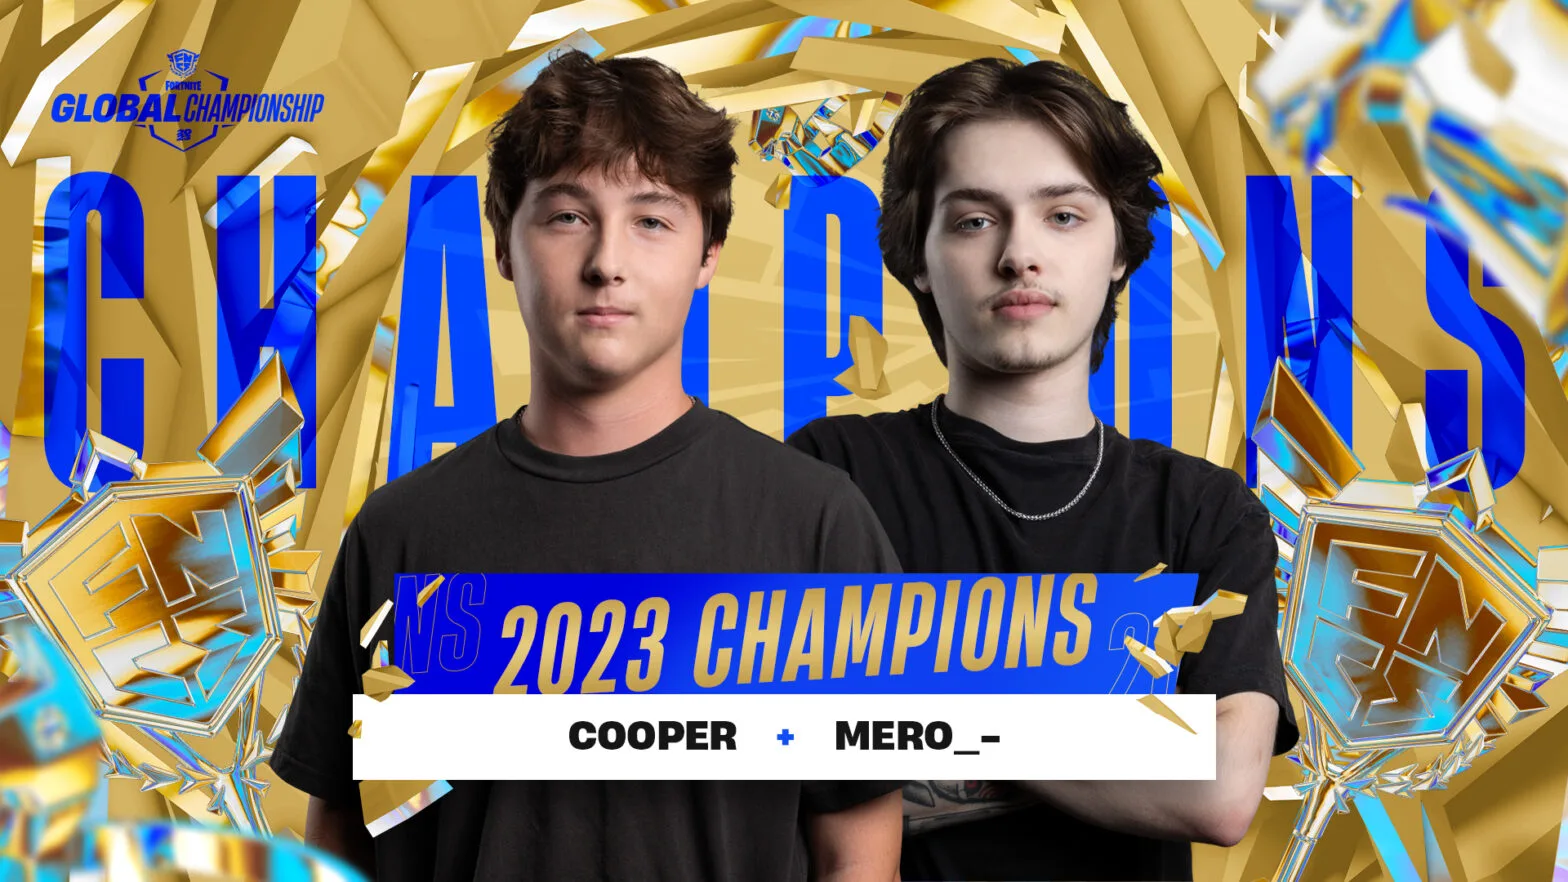 Duo of Cooper and Mero Take Home 2023 FNCS Championship » TalkEsport